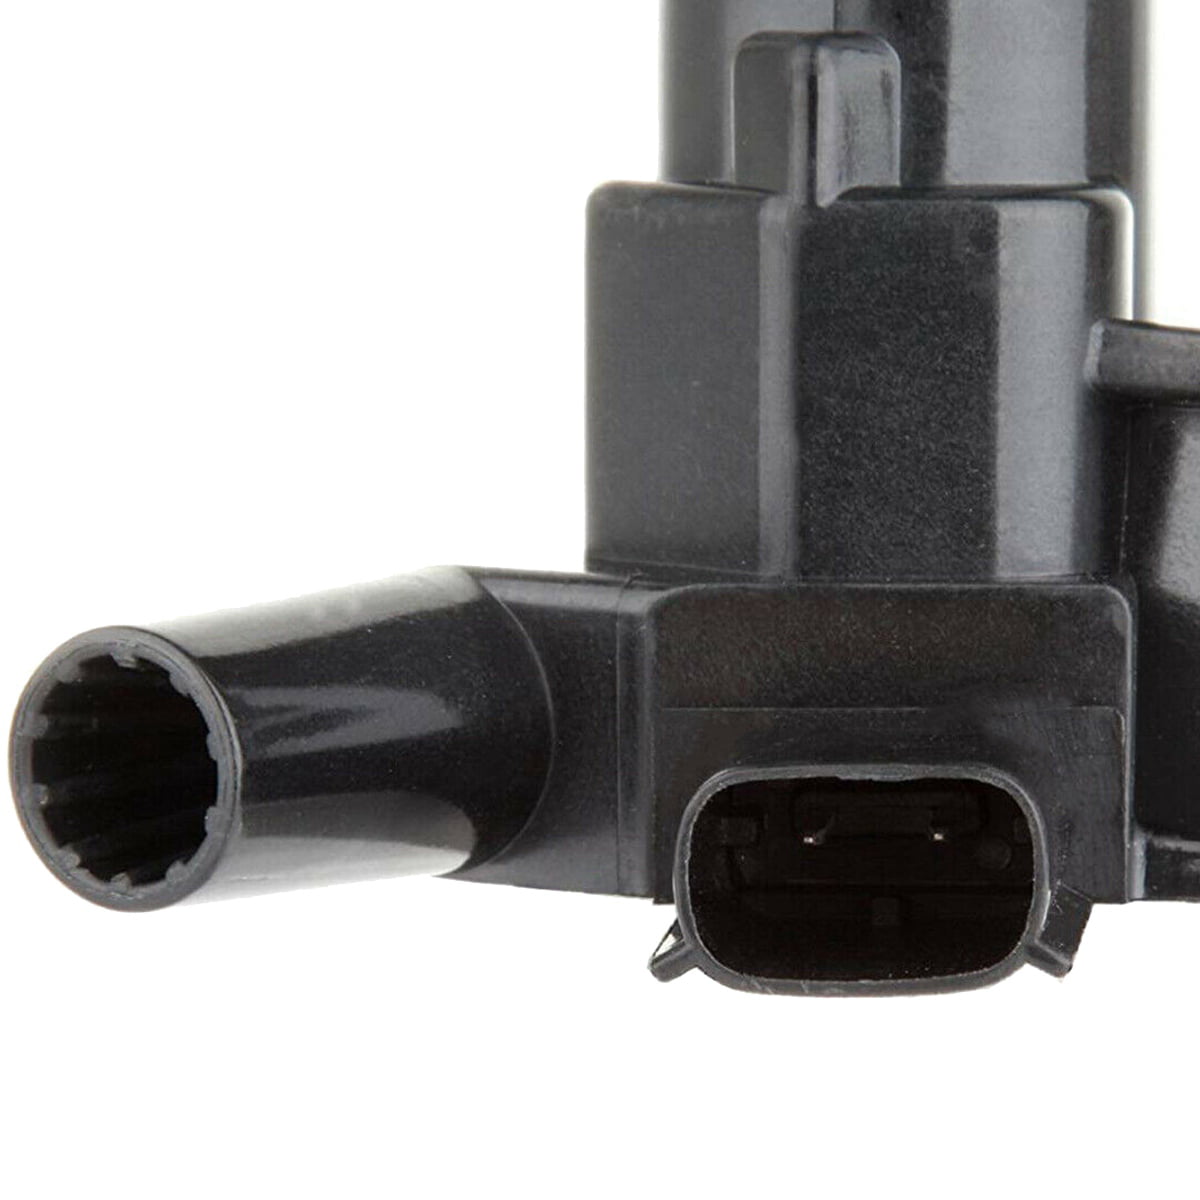 OEM Quality Ignition Coil for 10-14 Ford F150/11-16 F250 F350 Super Duty 6.2L V8